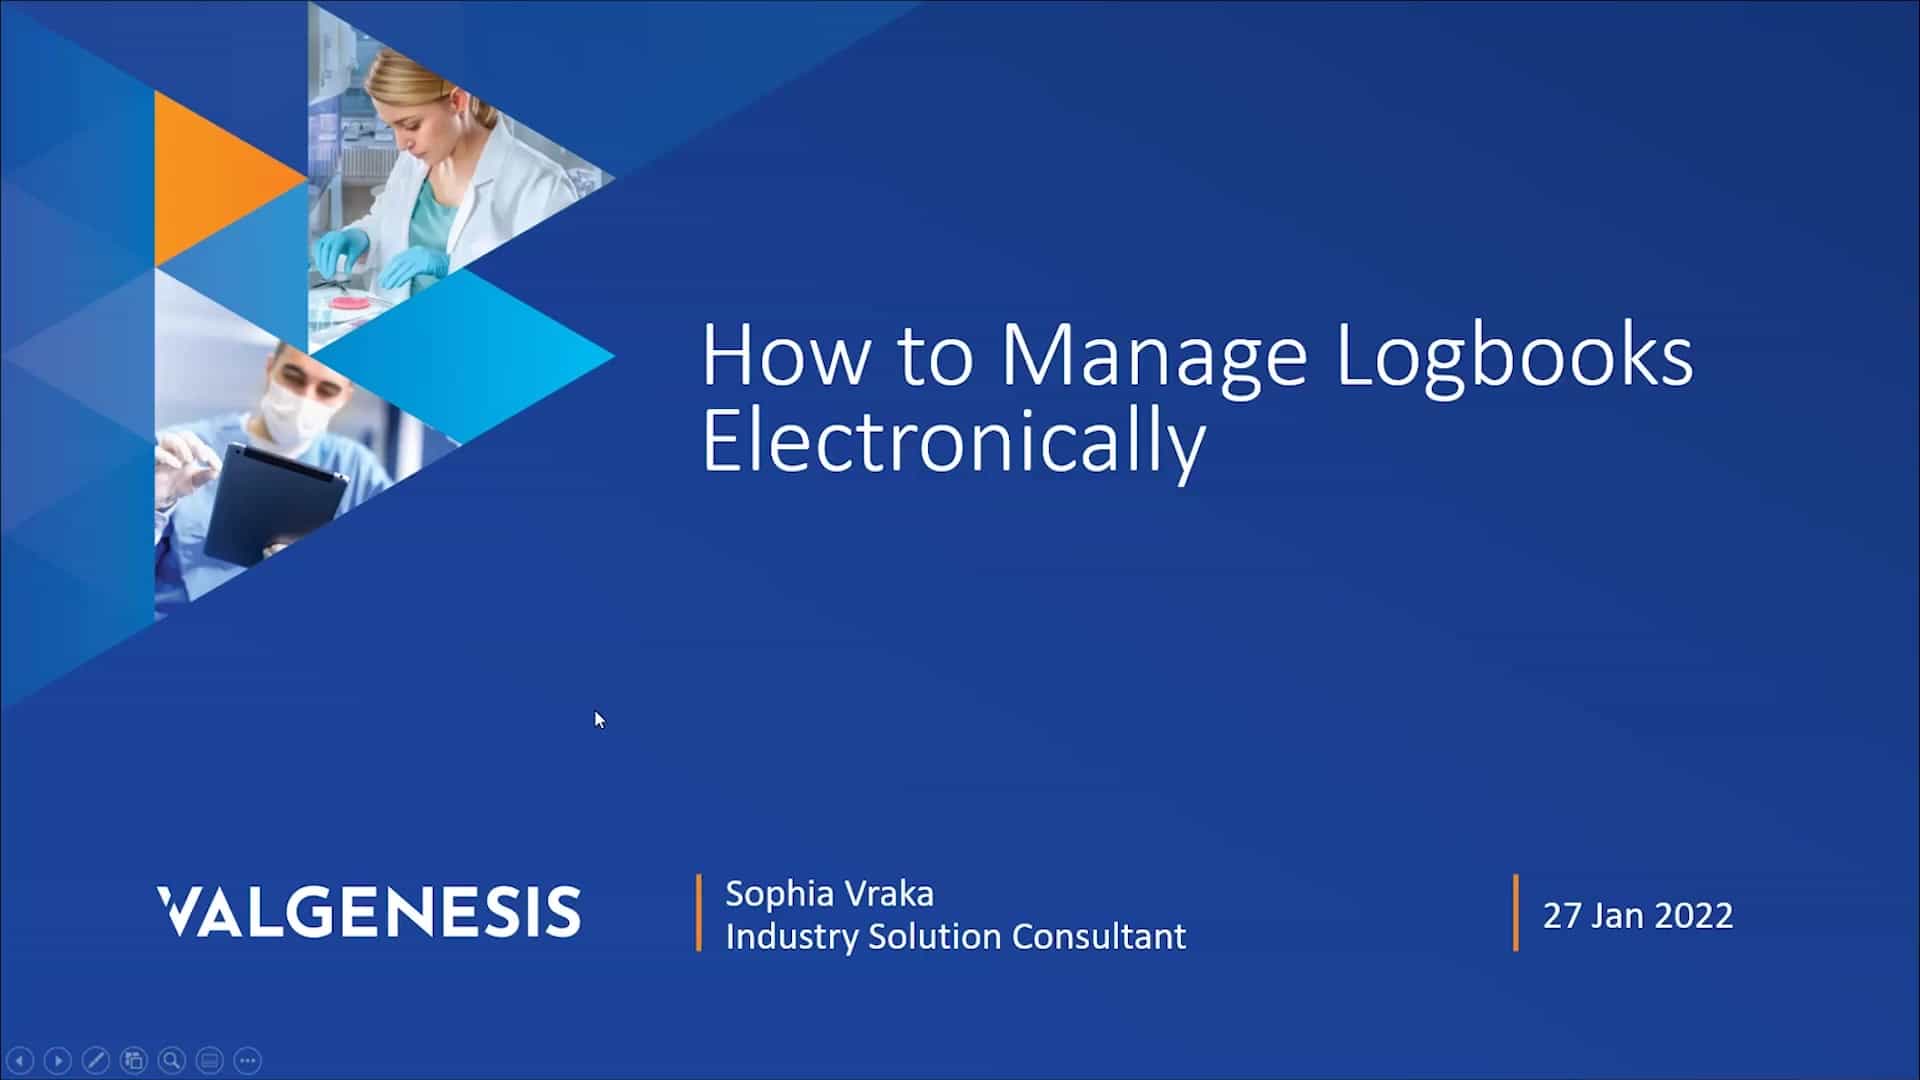 How to Manage Logbooks Electronically